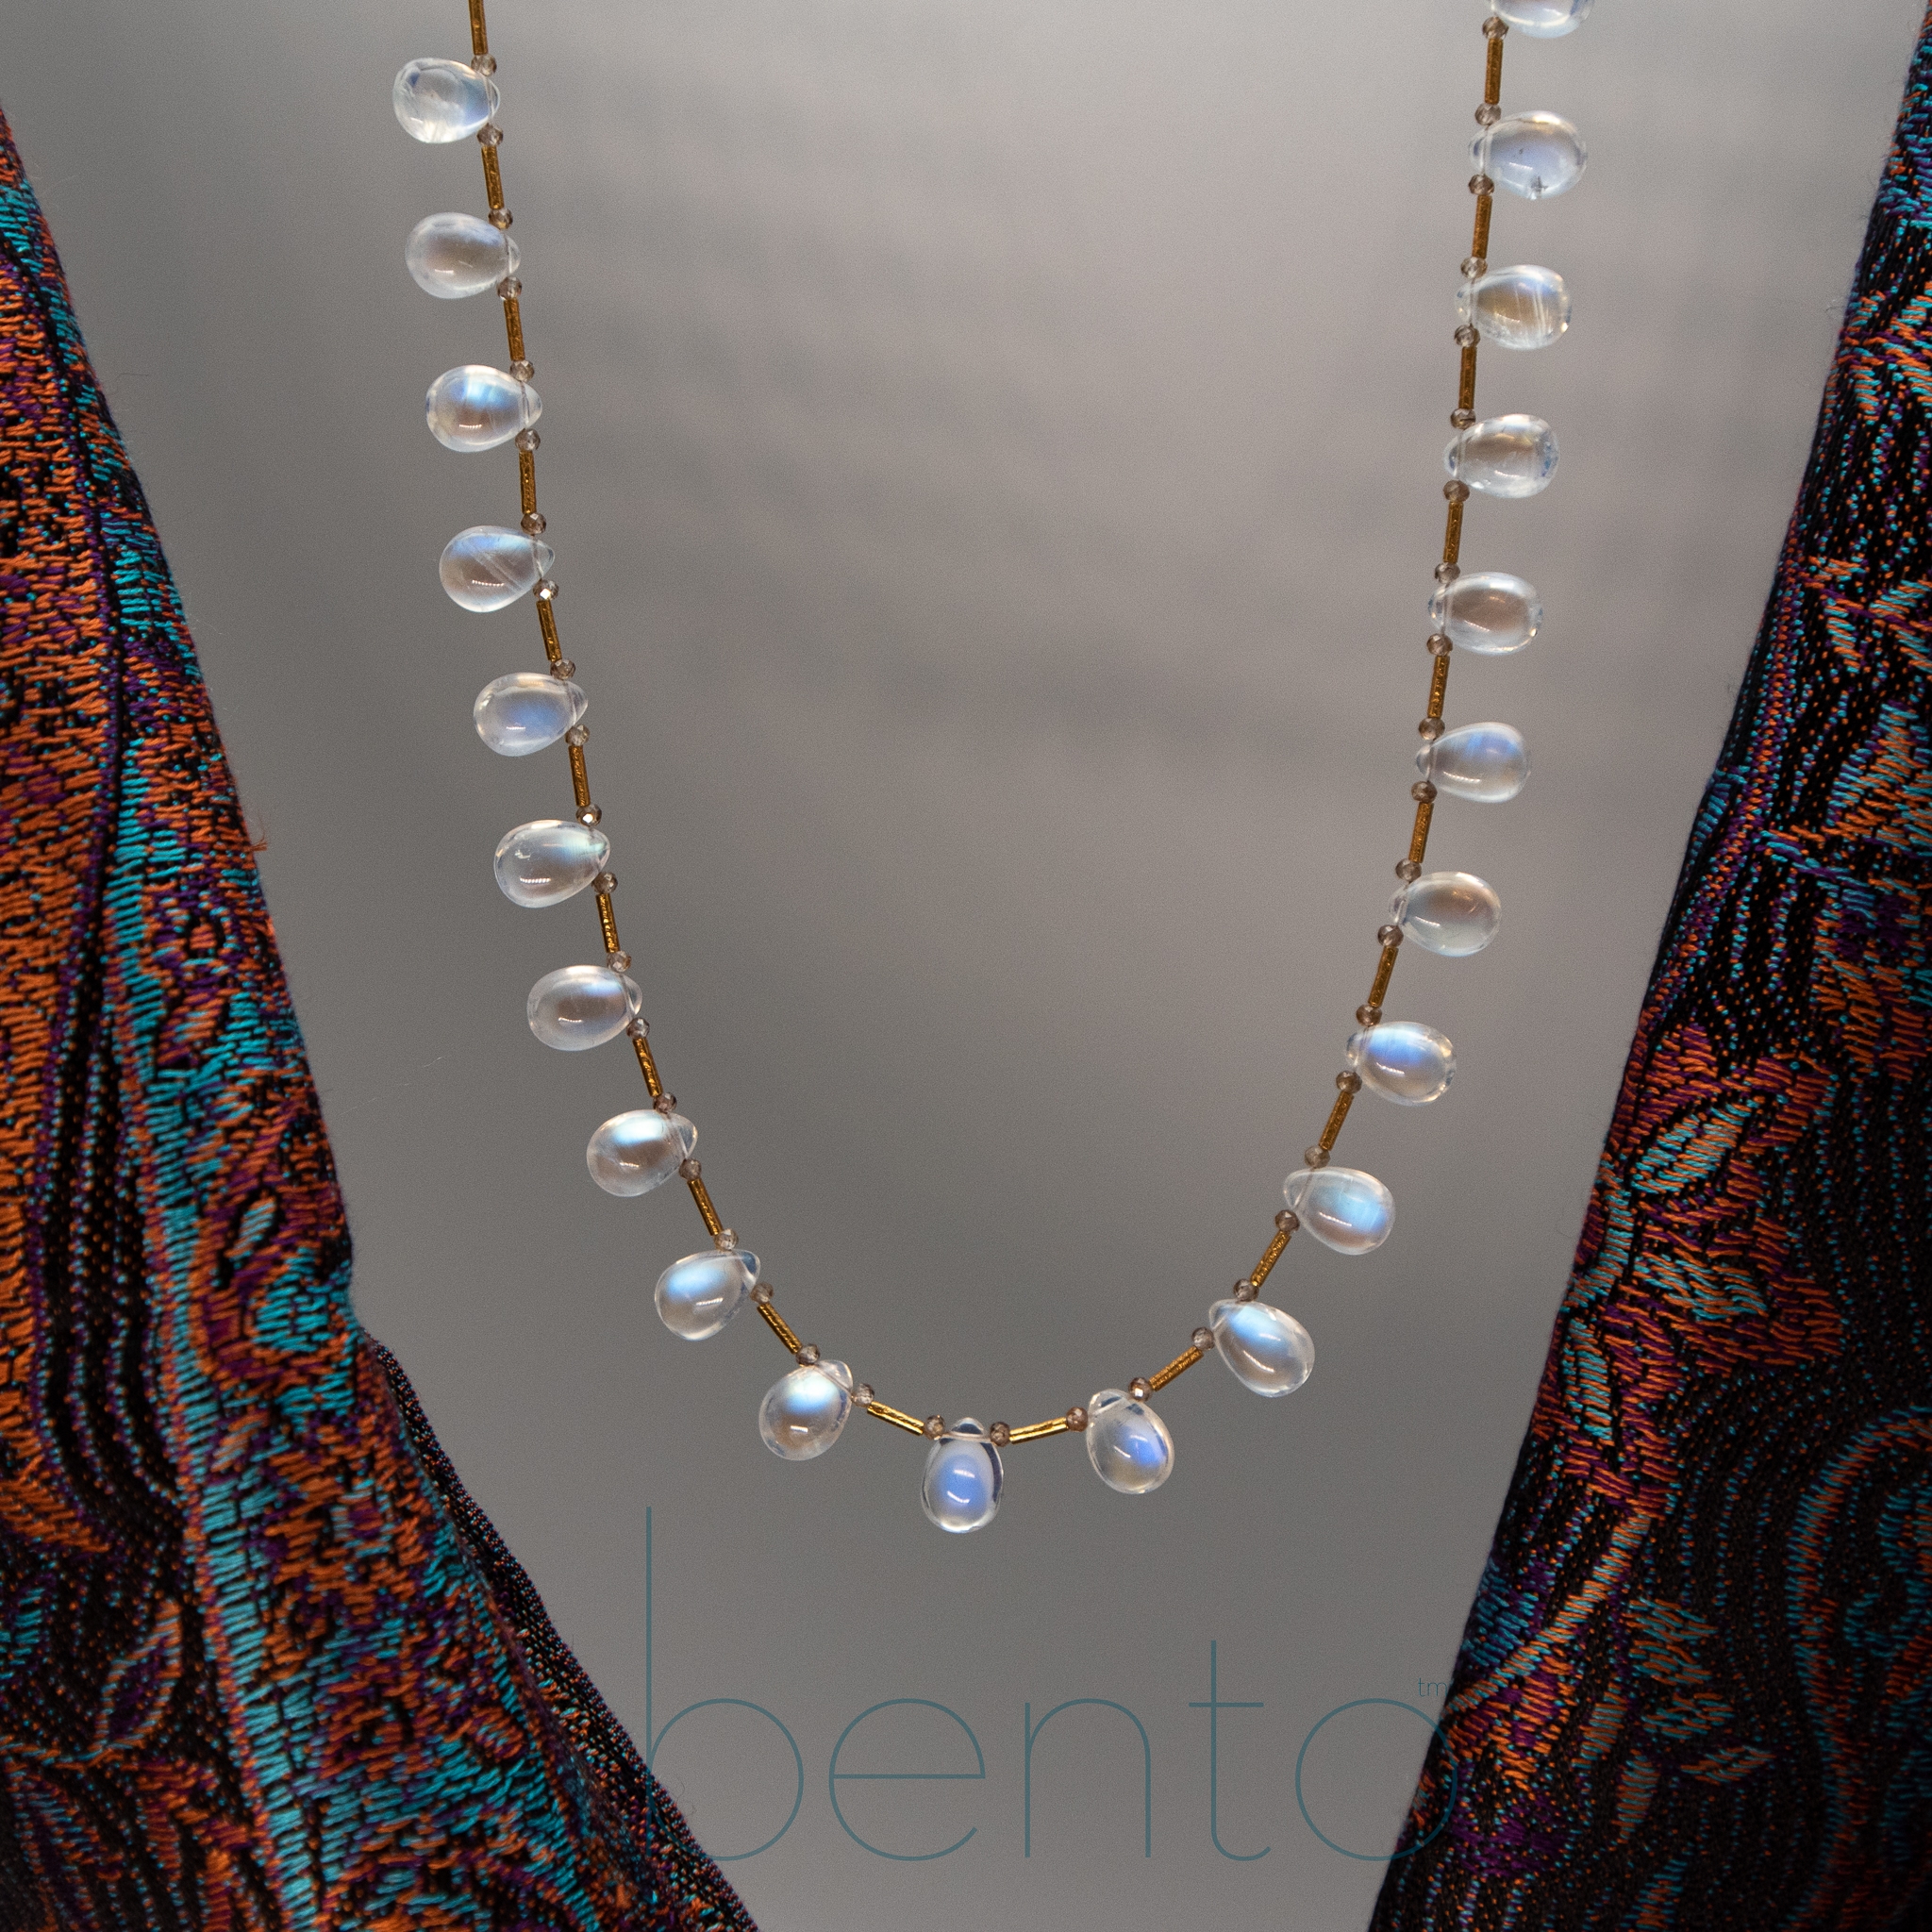 Rainbow Flash Smooth Briolette Moonstone Necklace shown against a light background